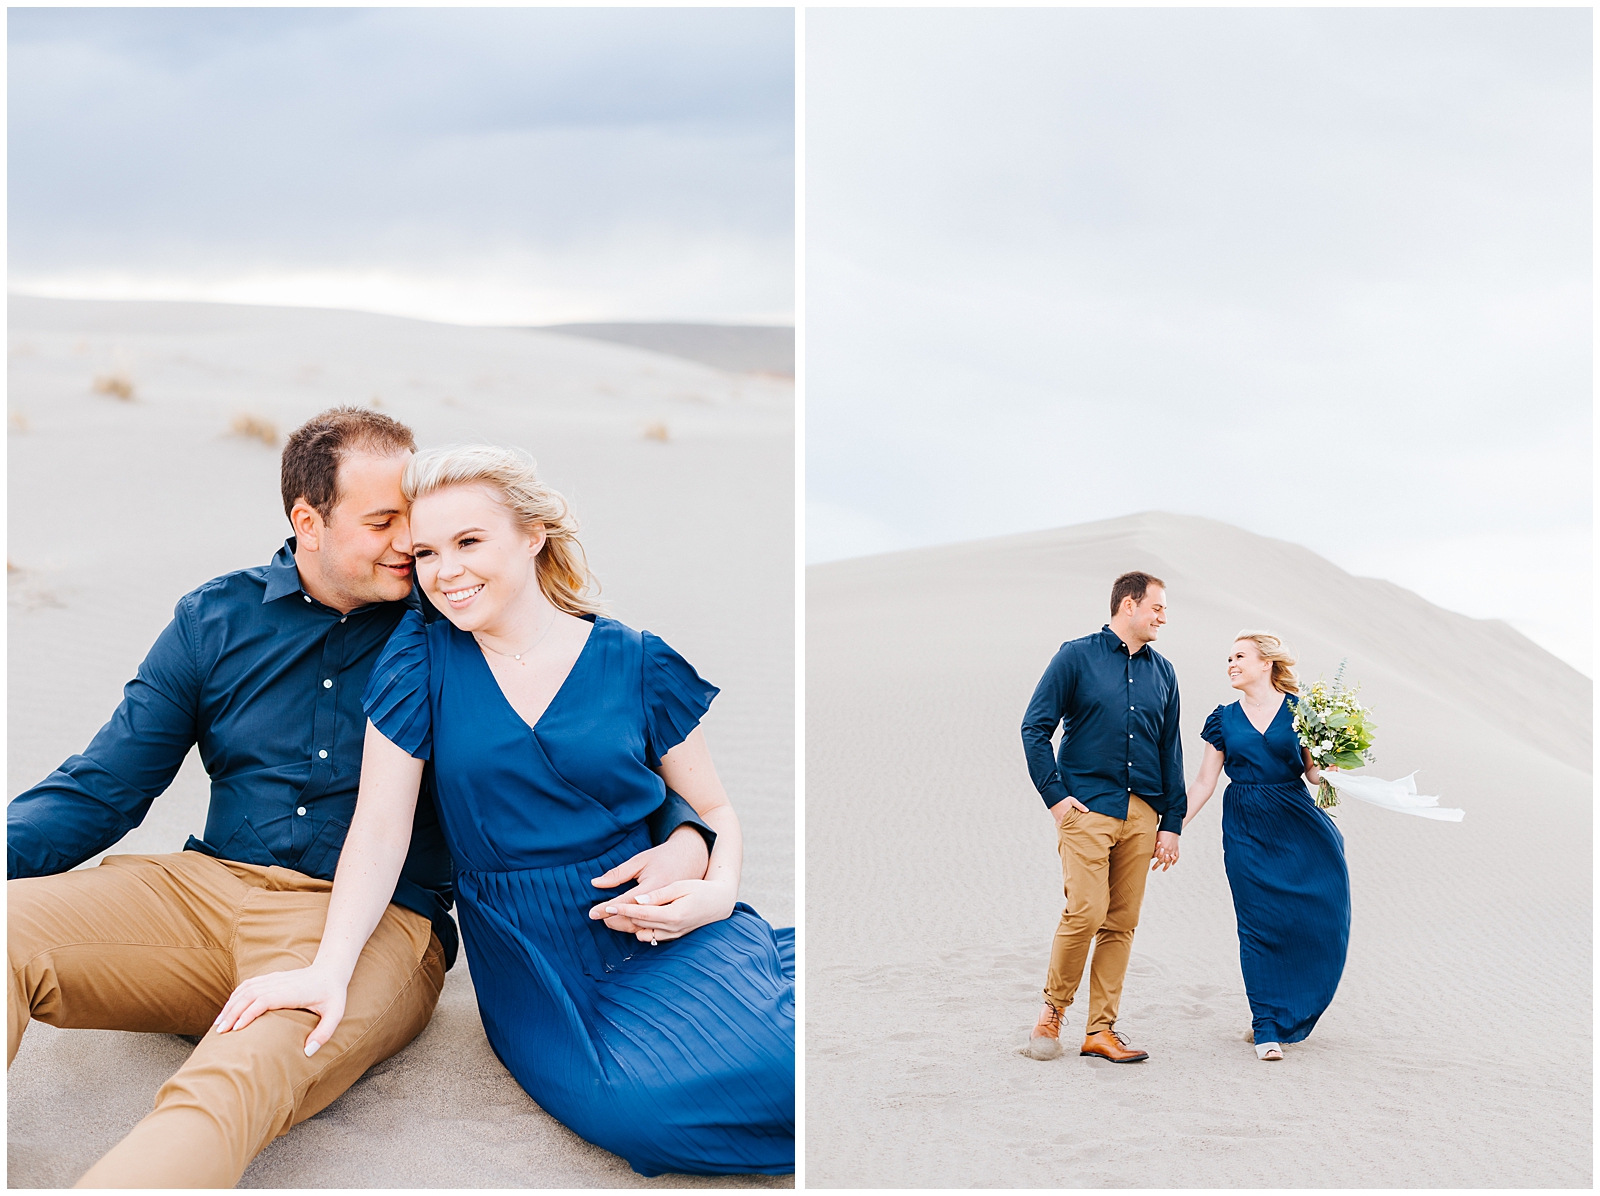 Stormy Sand Dunes Engagement Session